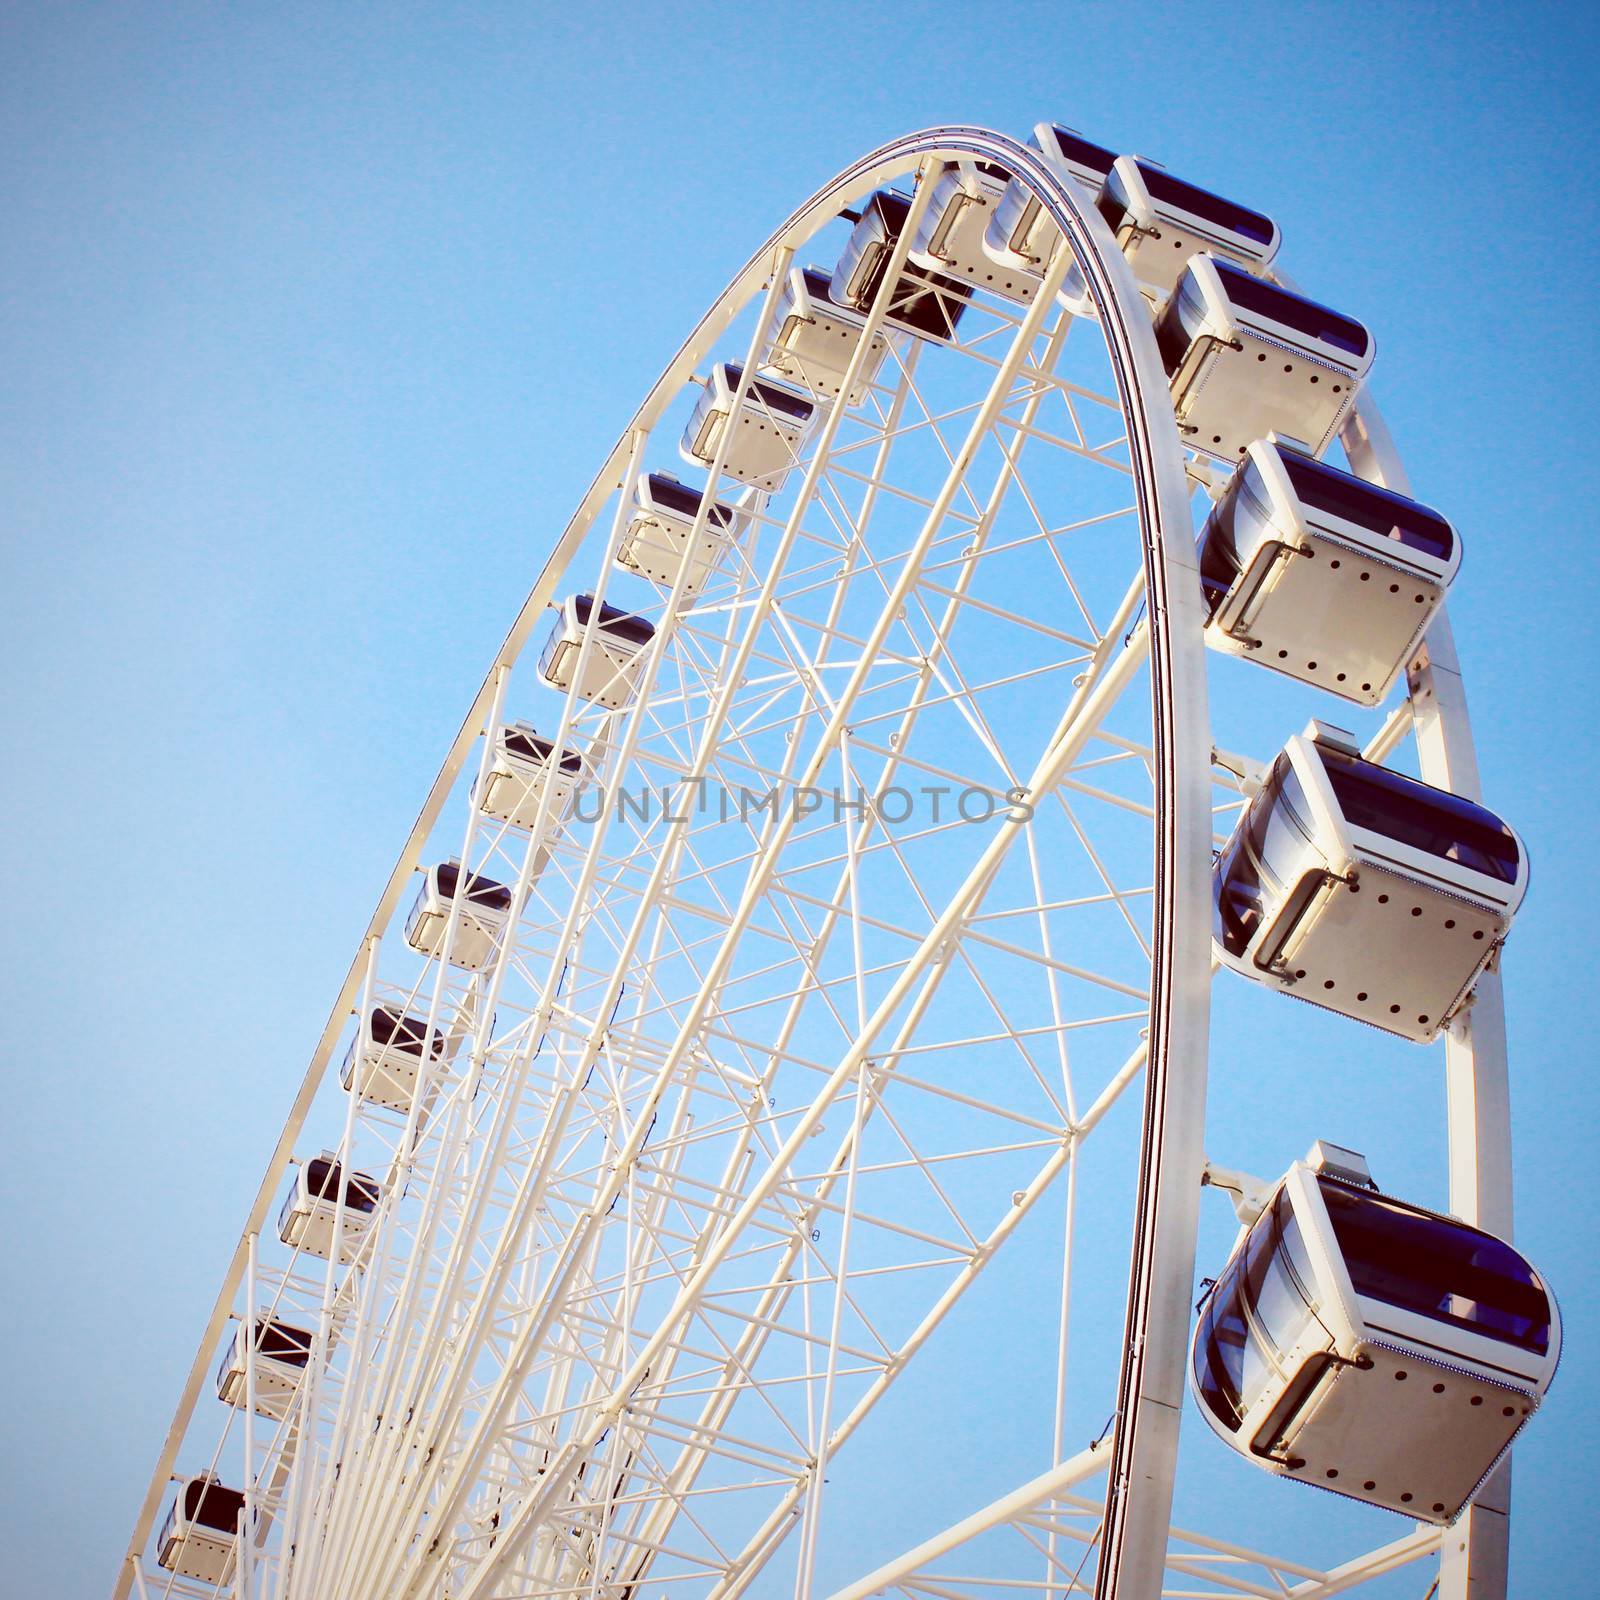 Ferris wheel with clear blue sky, retro filter effect